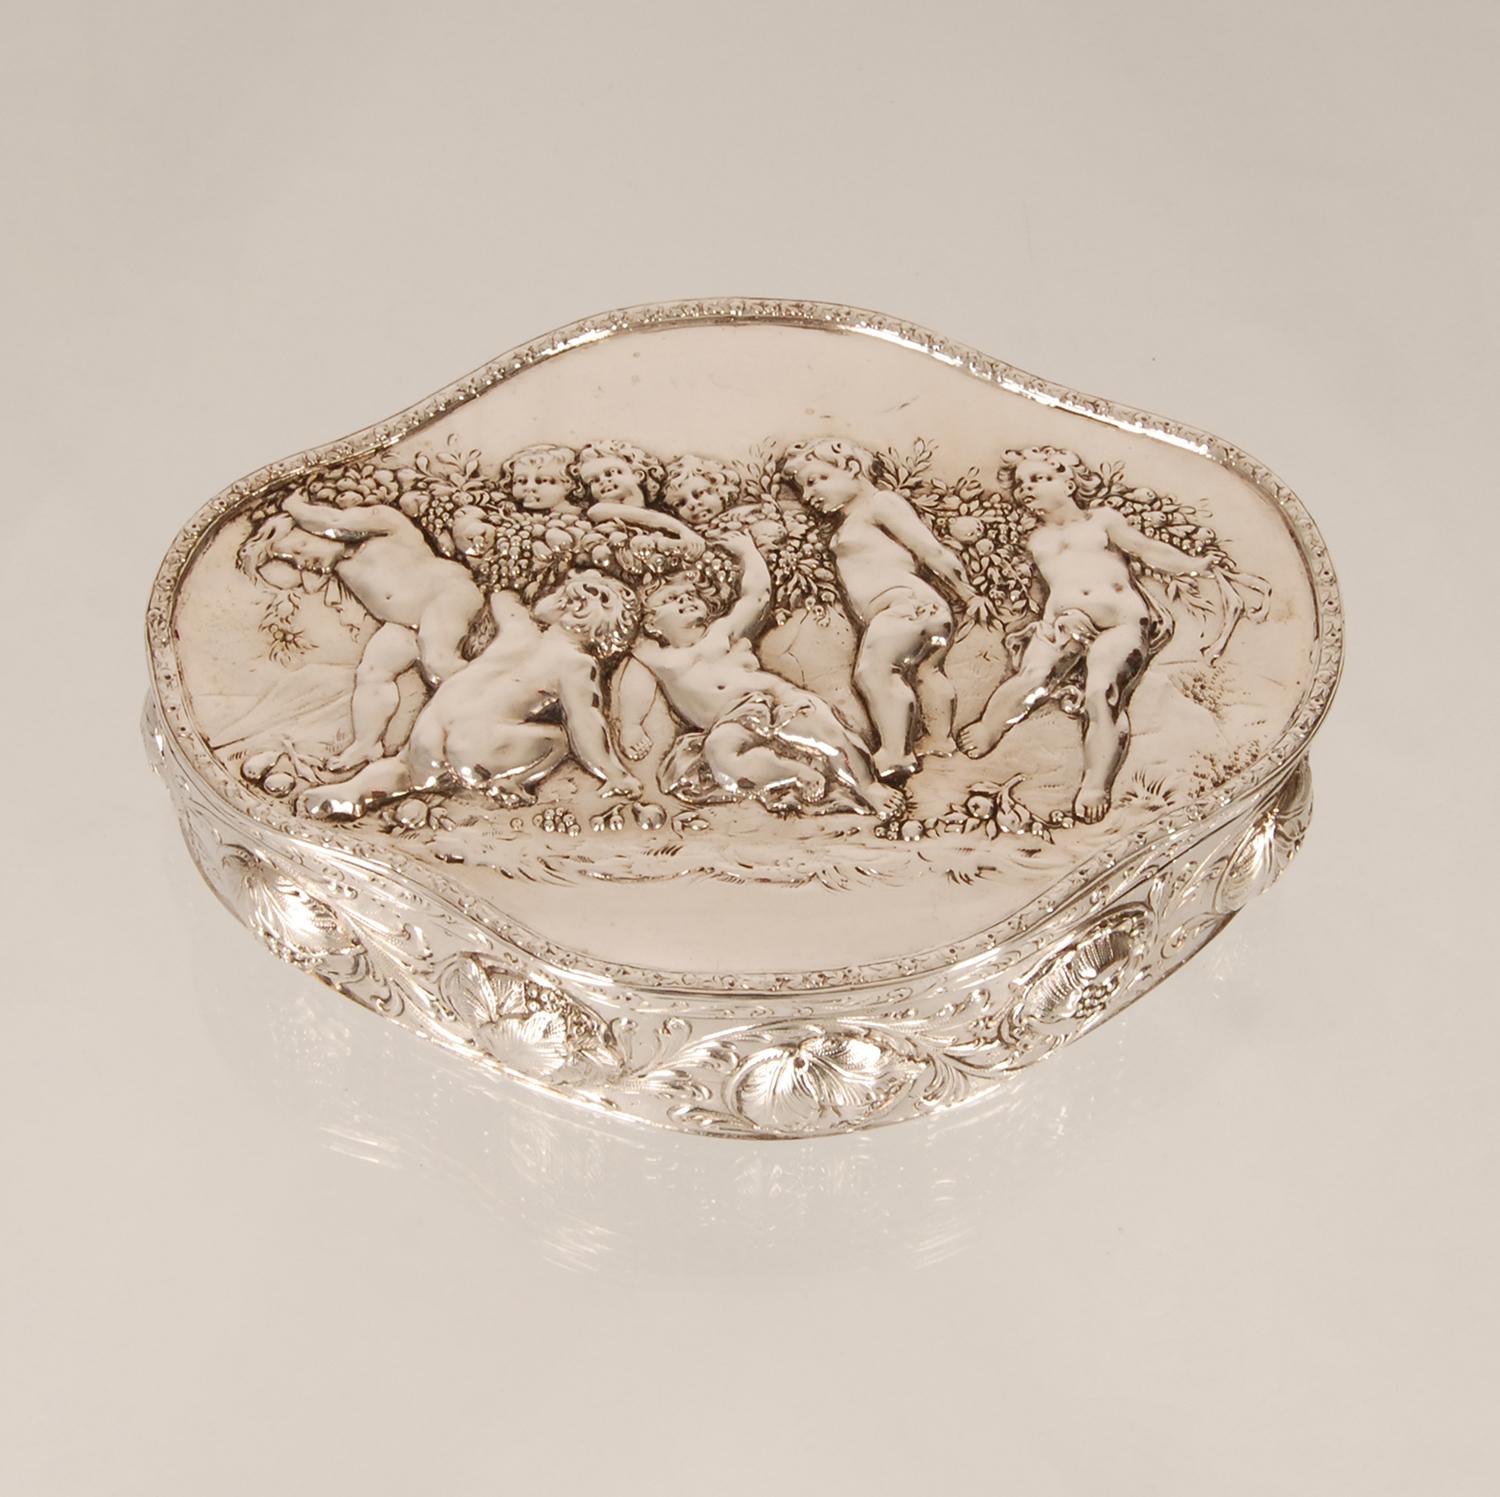 Hanau Silver Jewelry Box J.D.Schleissner and Sons Antique German Casket Putto For Sale 11